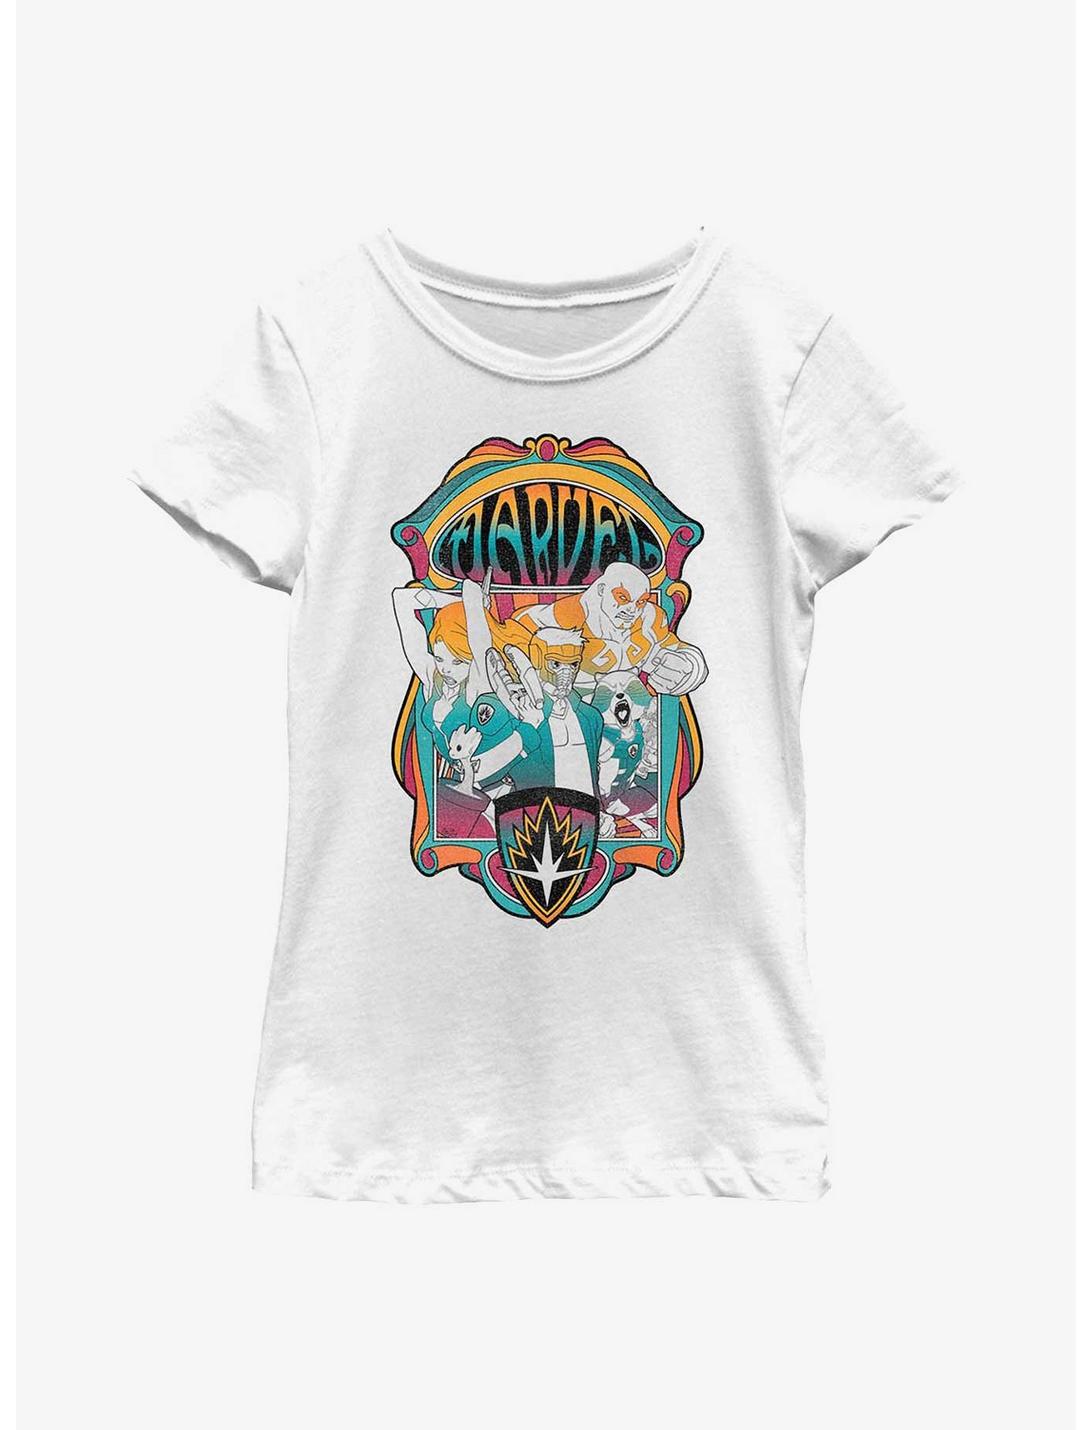 Marvel Guardians of the Galaxy Retro Galaxy Youth Girls T-Shirt, WHITE, hi-res